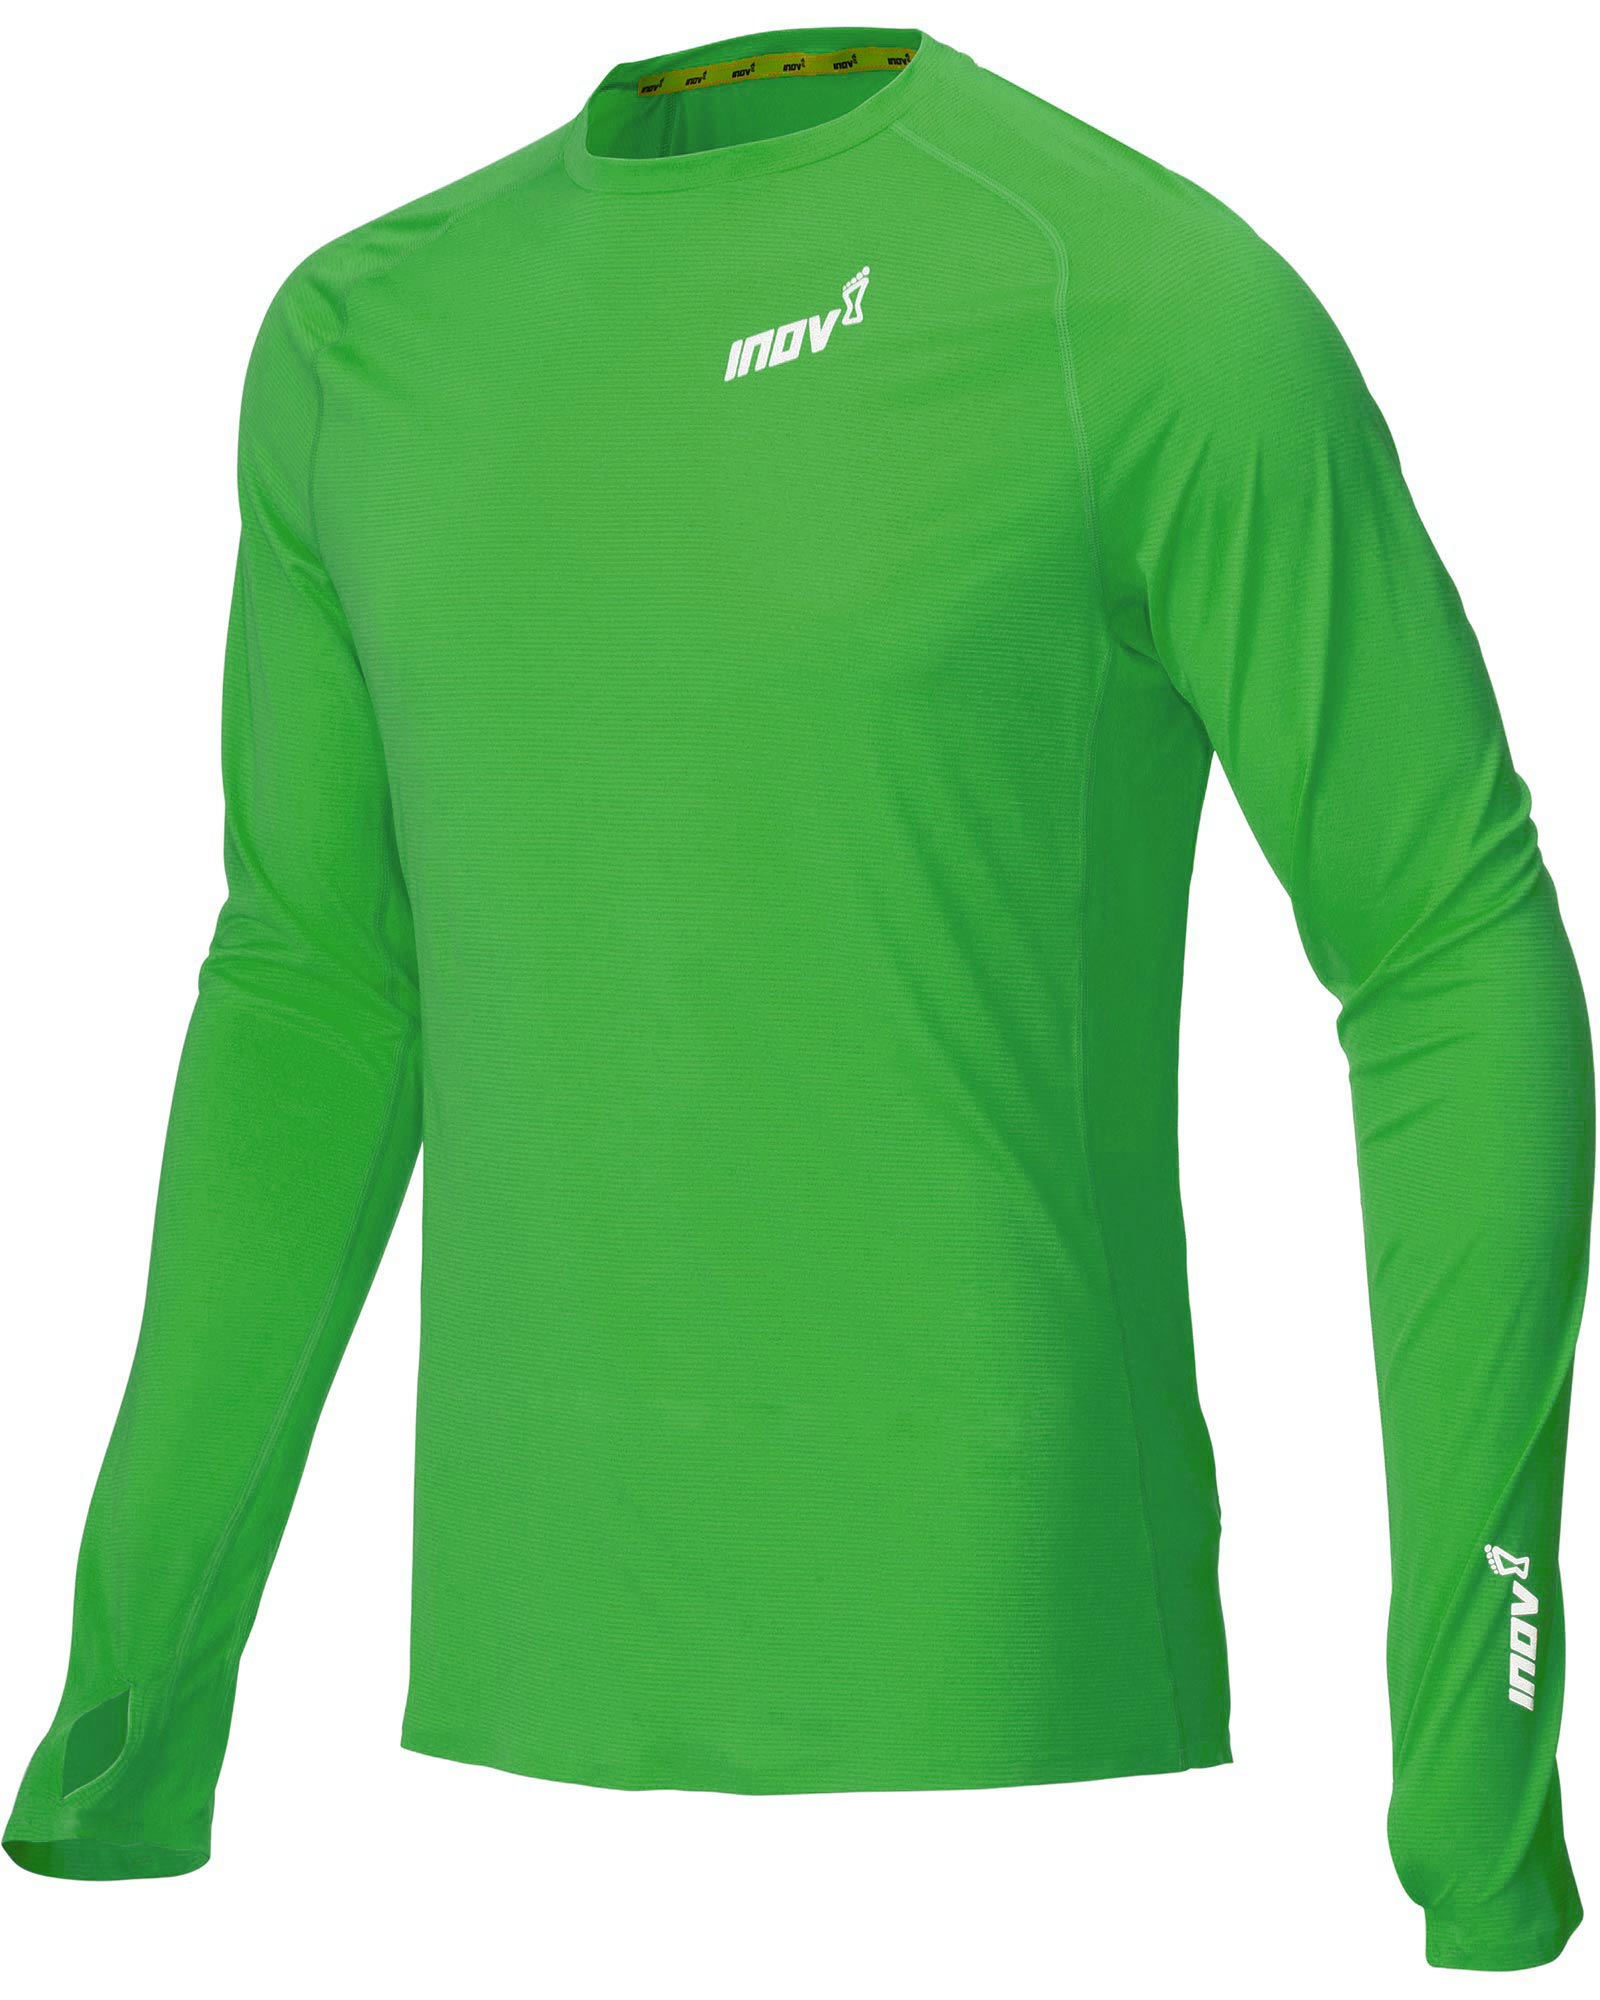 Product image of Inov-8 Base Men's Long Sleeve Top